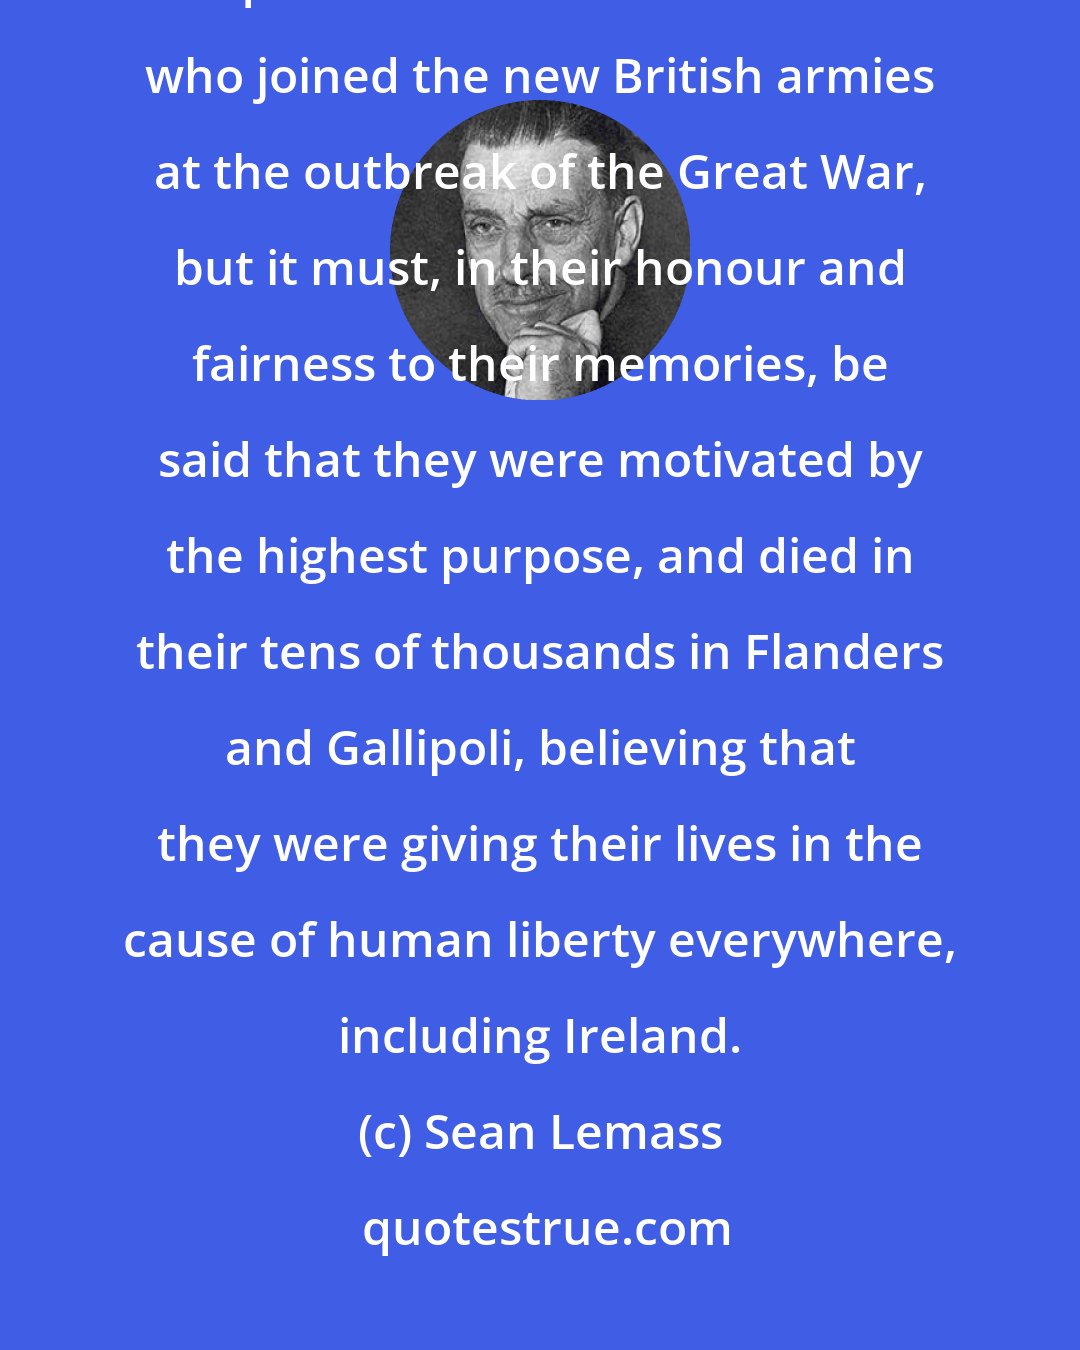 Sean Lemass: In later years, it was common, and I was guilty in this respect, to question the motives of those who joined the new British armies at the outbreak of the Great War, but it must, in their honour and fairness to their memories, be said that they were motivated by the highest purpose, and died in their tens of thousands in Flanders and Gallipoli, believing that they were giving their lives in the cause of human liberty everywhere, including Ireland.